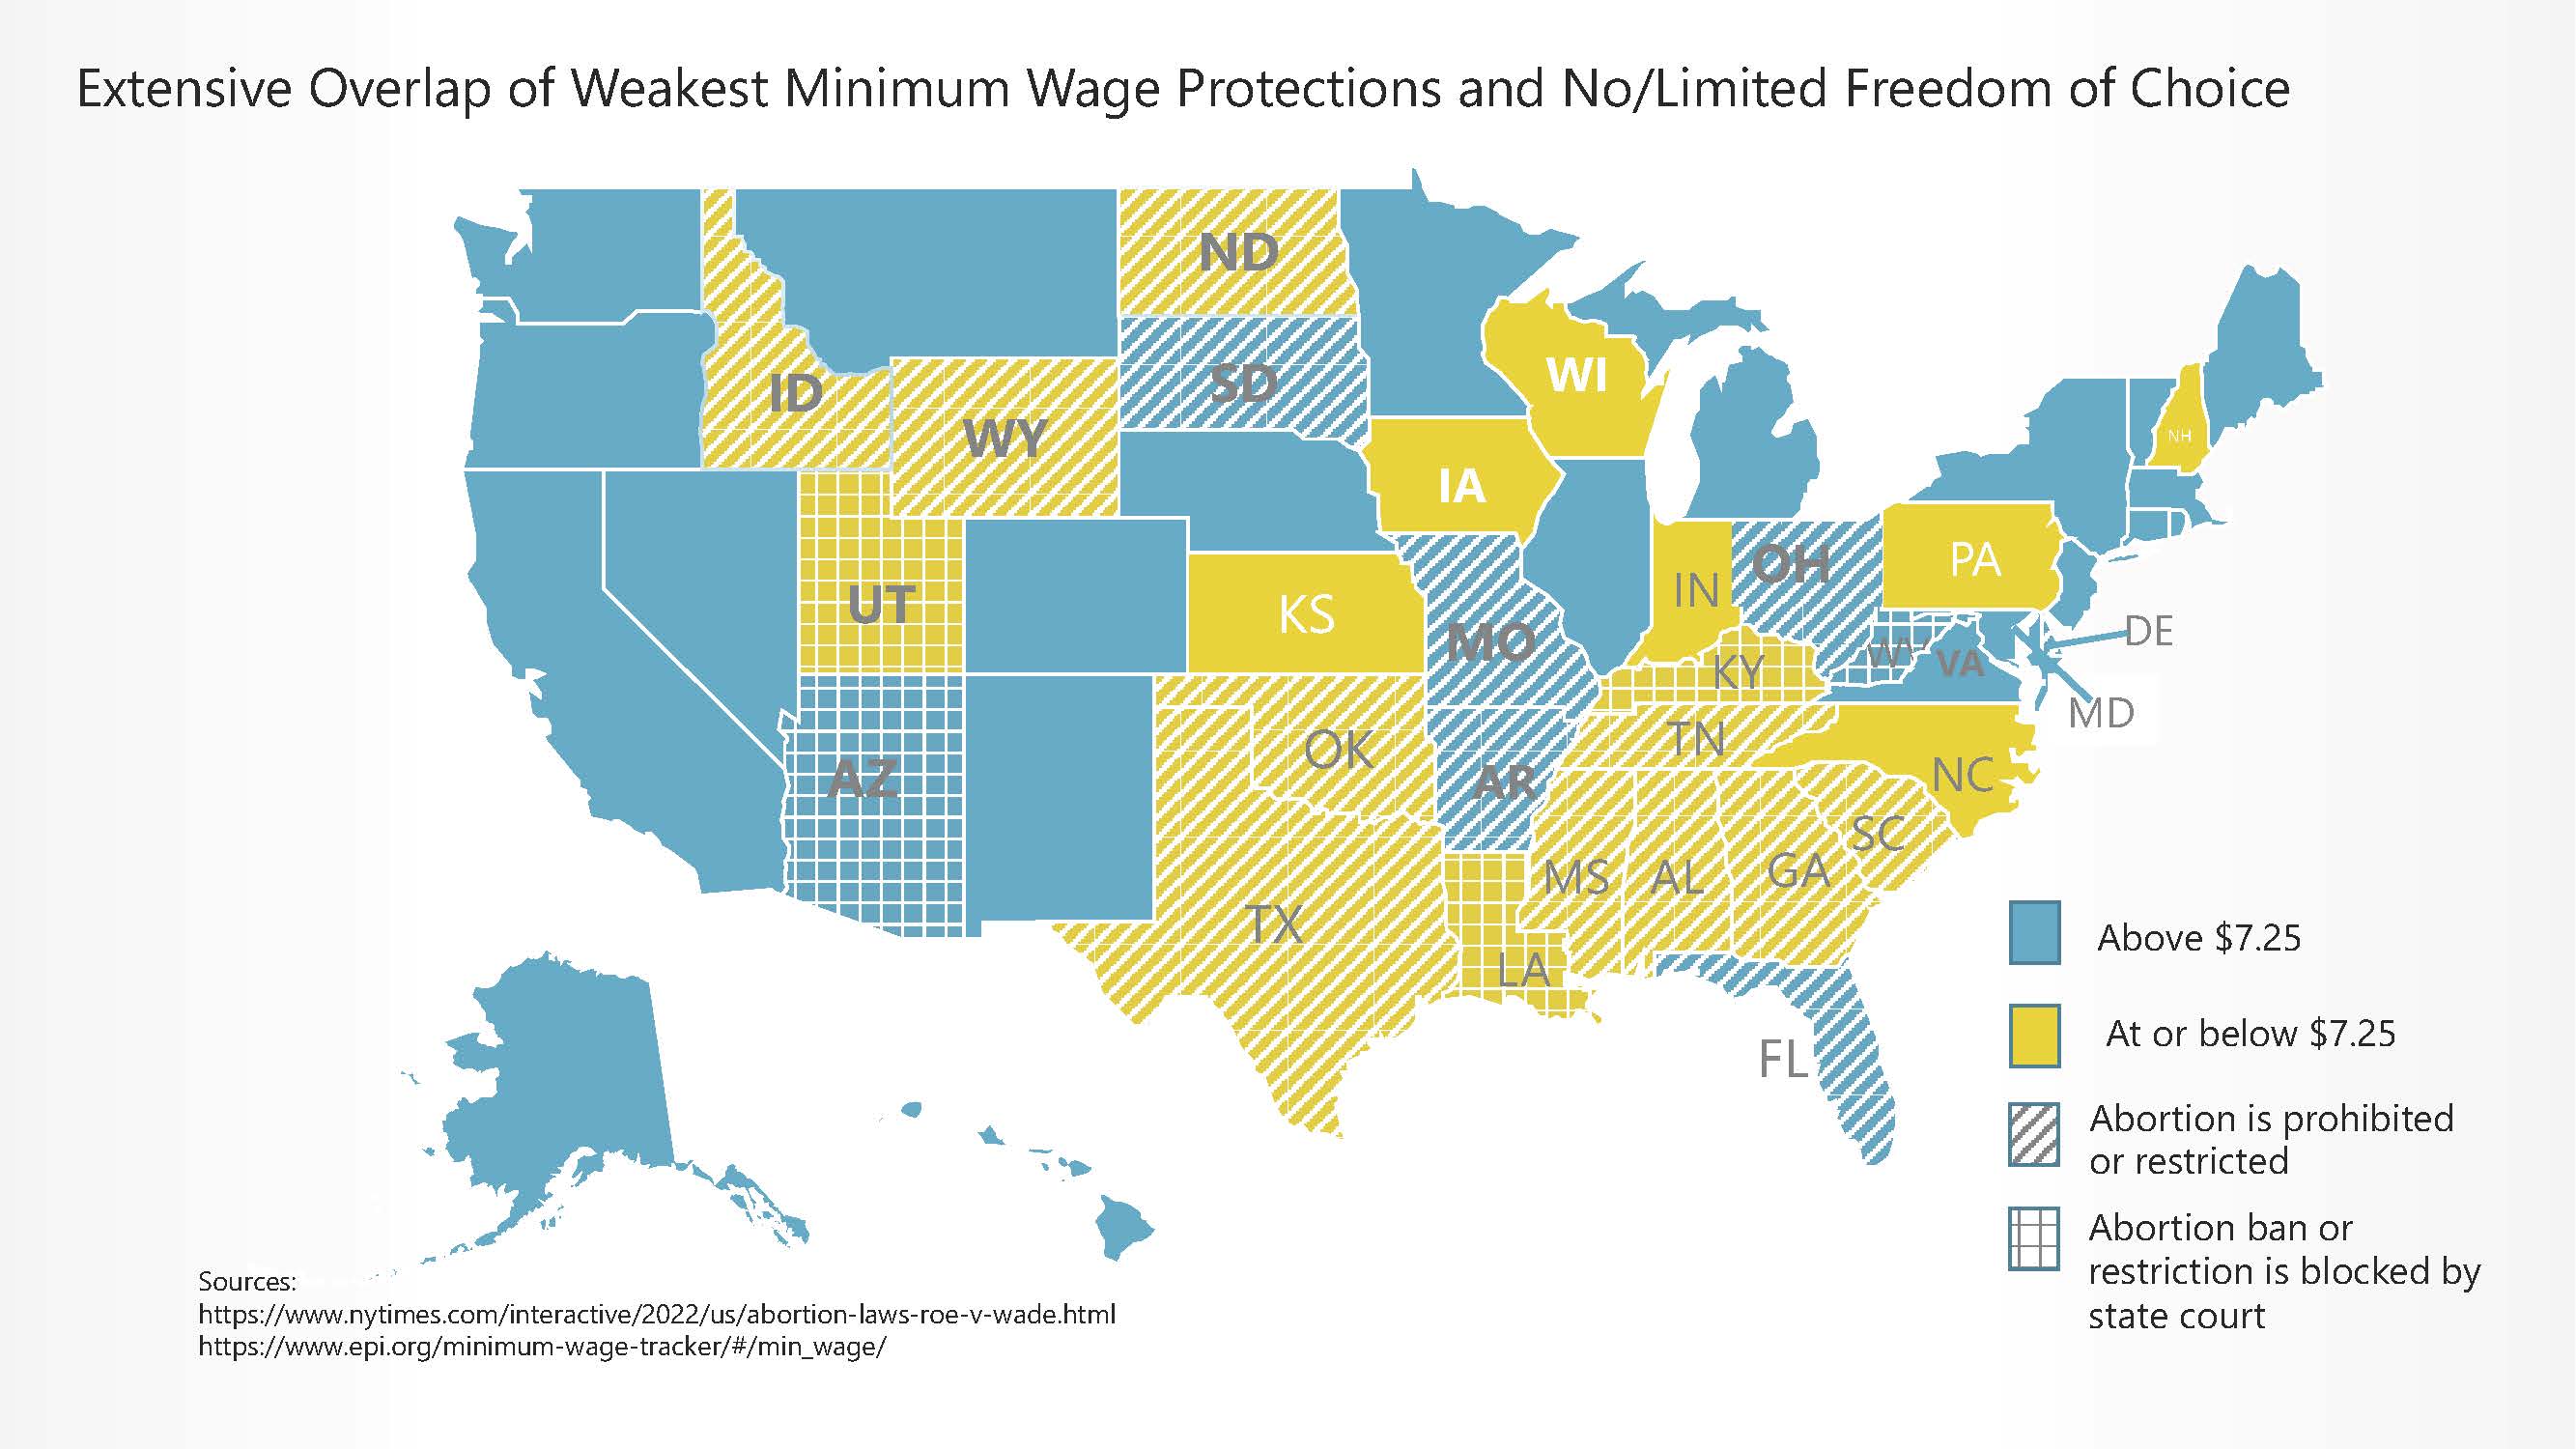 Extensive Overlap of Weakest Minimum Wage Protections and No/Limited Freedom of Choice